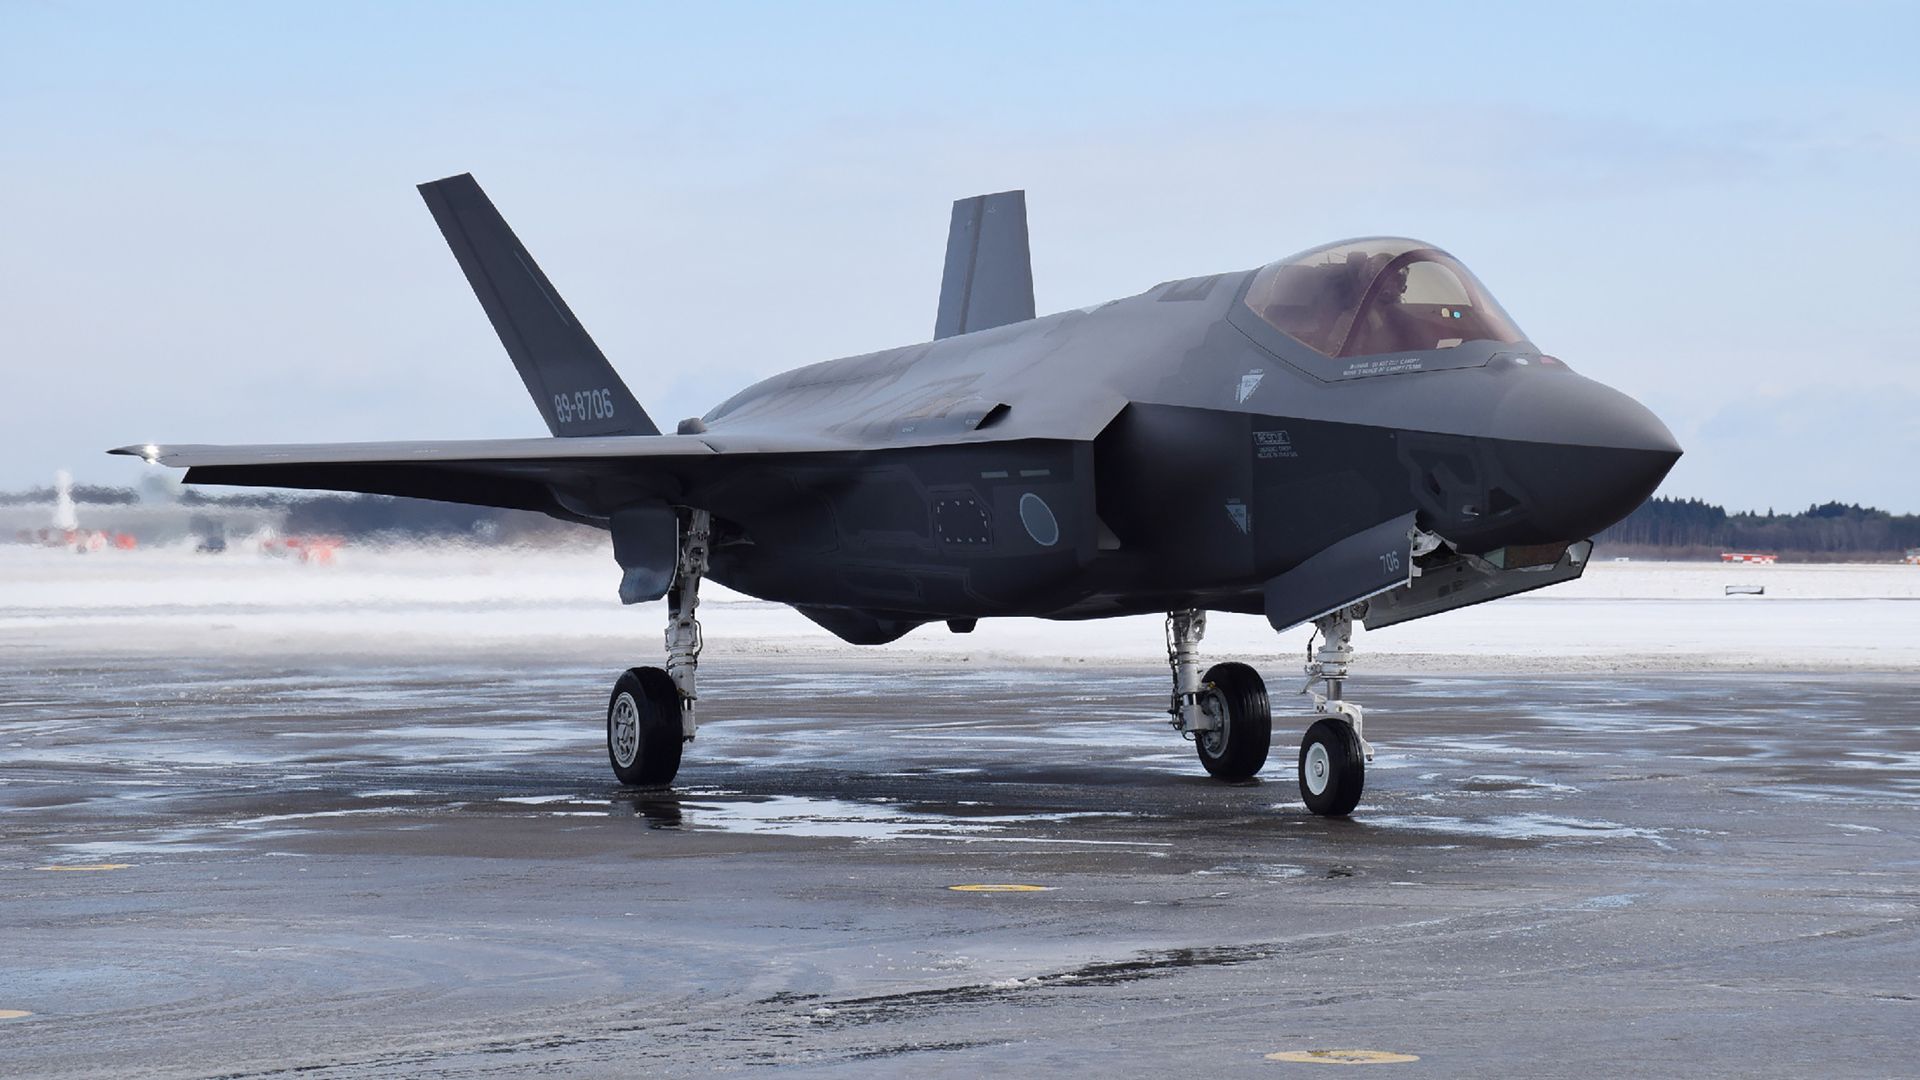 A F-35A stealth fighter jet of Japan's Self-Defence Forces, the same model as the one that crashed.